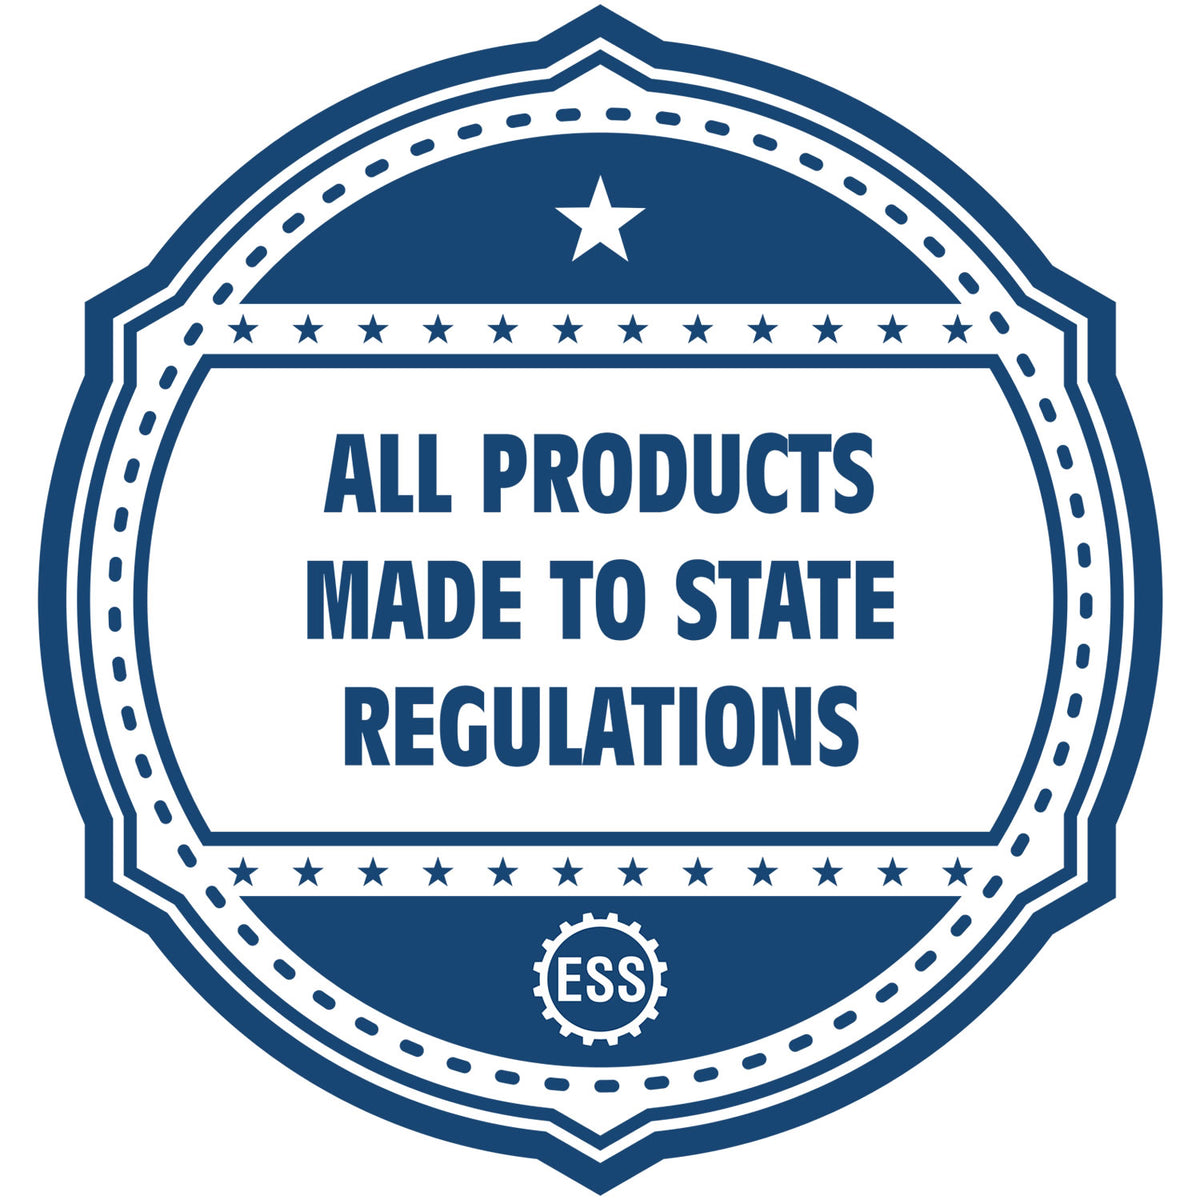 An icon or badge element for the Wooden Handle New York State Seal Notary Public Stamp showing that this product is made in compliance with state regulations.